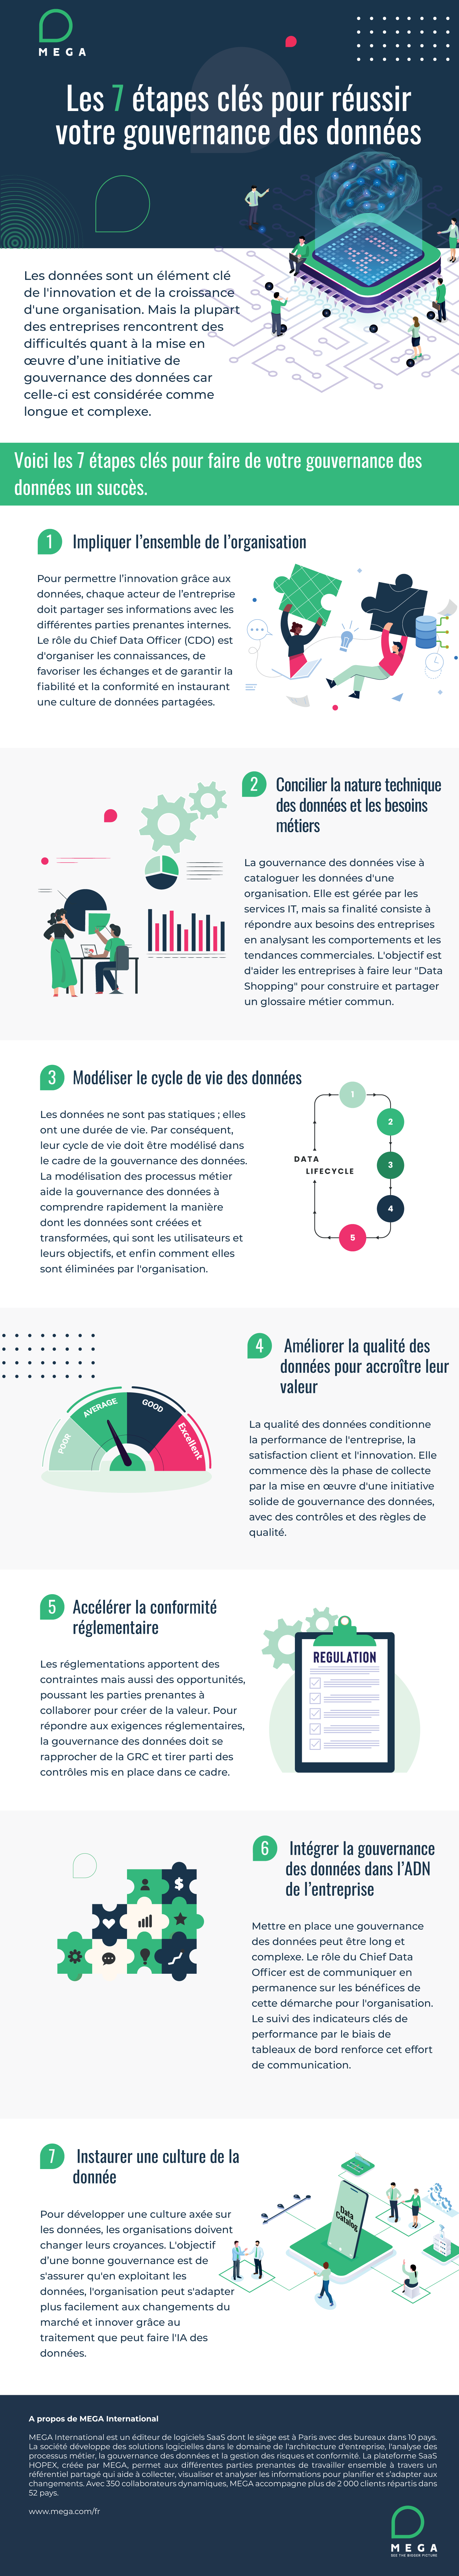 Infographic-Data-governance-challenges-(FR).png